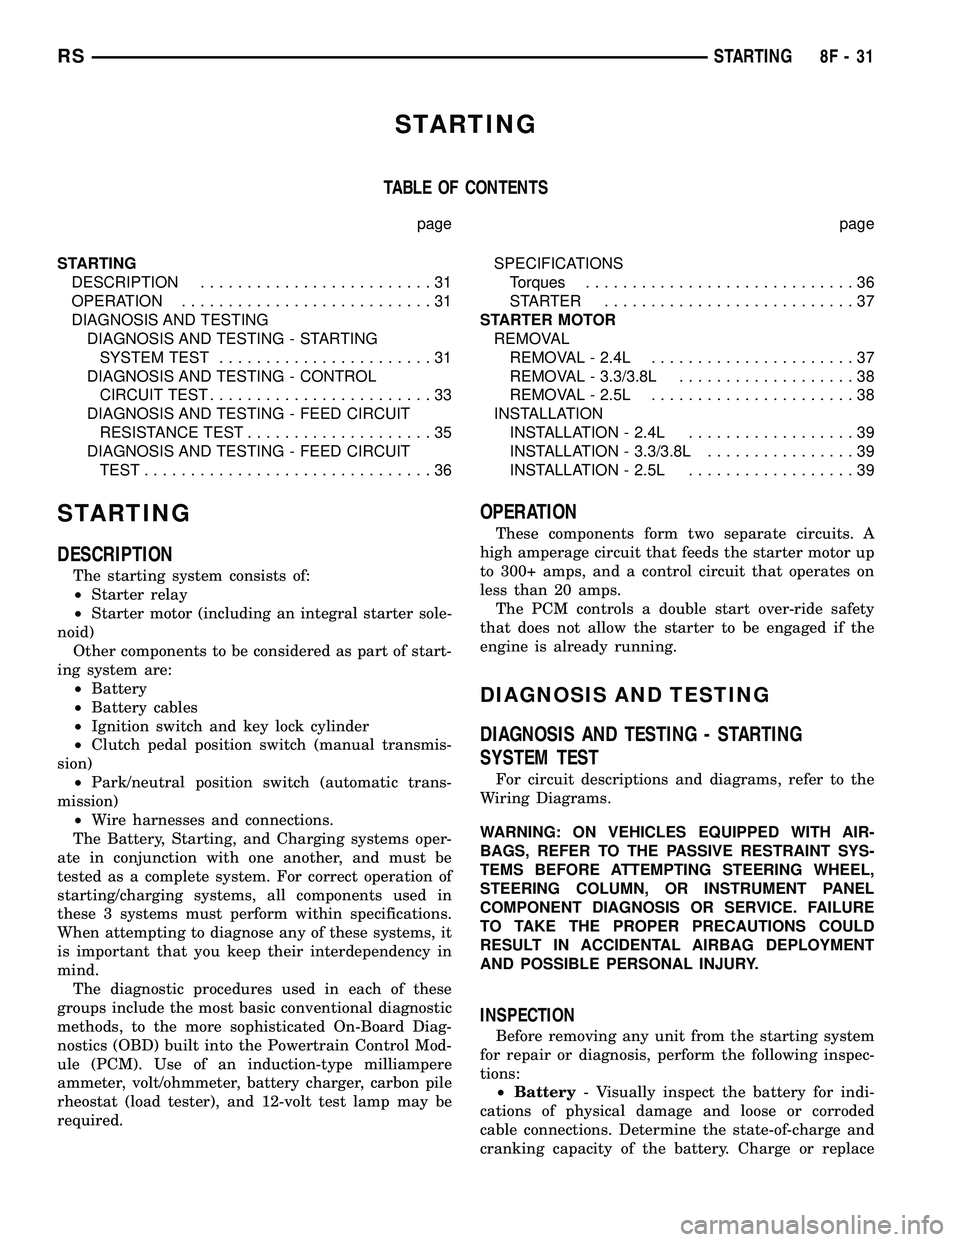 CHRYSLER VOYAGER 2005  Service Manual STARTING
TABLE OF CONTENTS
page page
STARTING
DESCRIPTION.........................31
OPERATION...........................31
DIAGNOSIS AND TESTING
DIAGNOSIS AND TESTING - STARTING
SYSTEM TEST..........